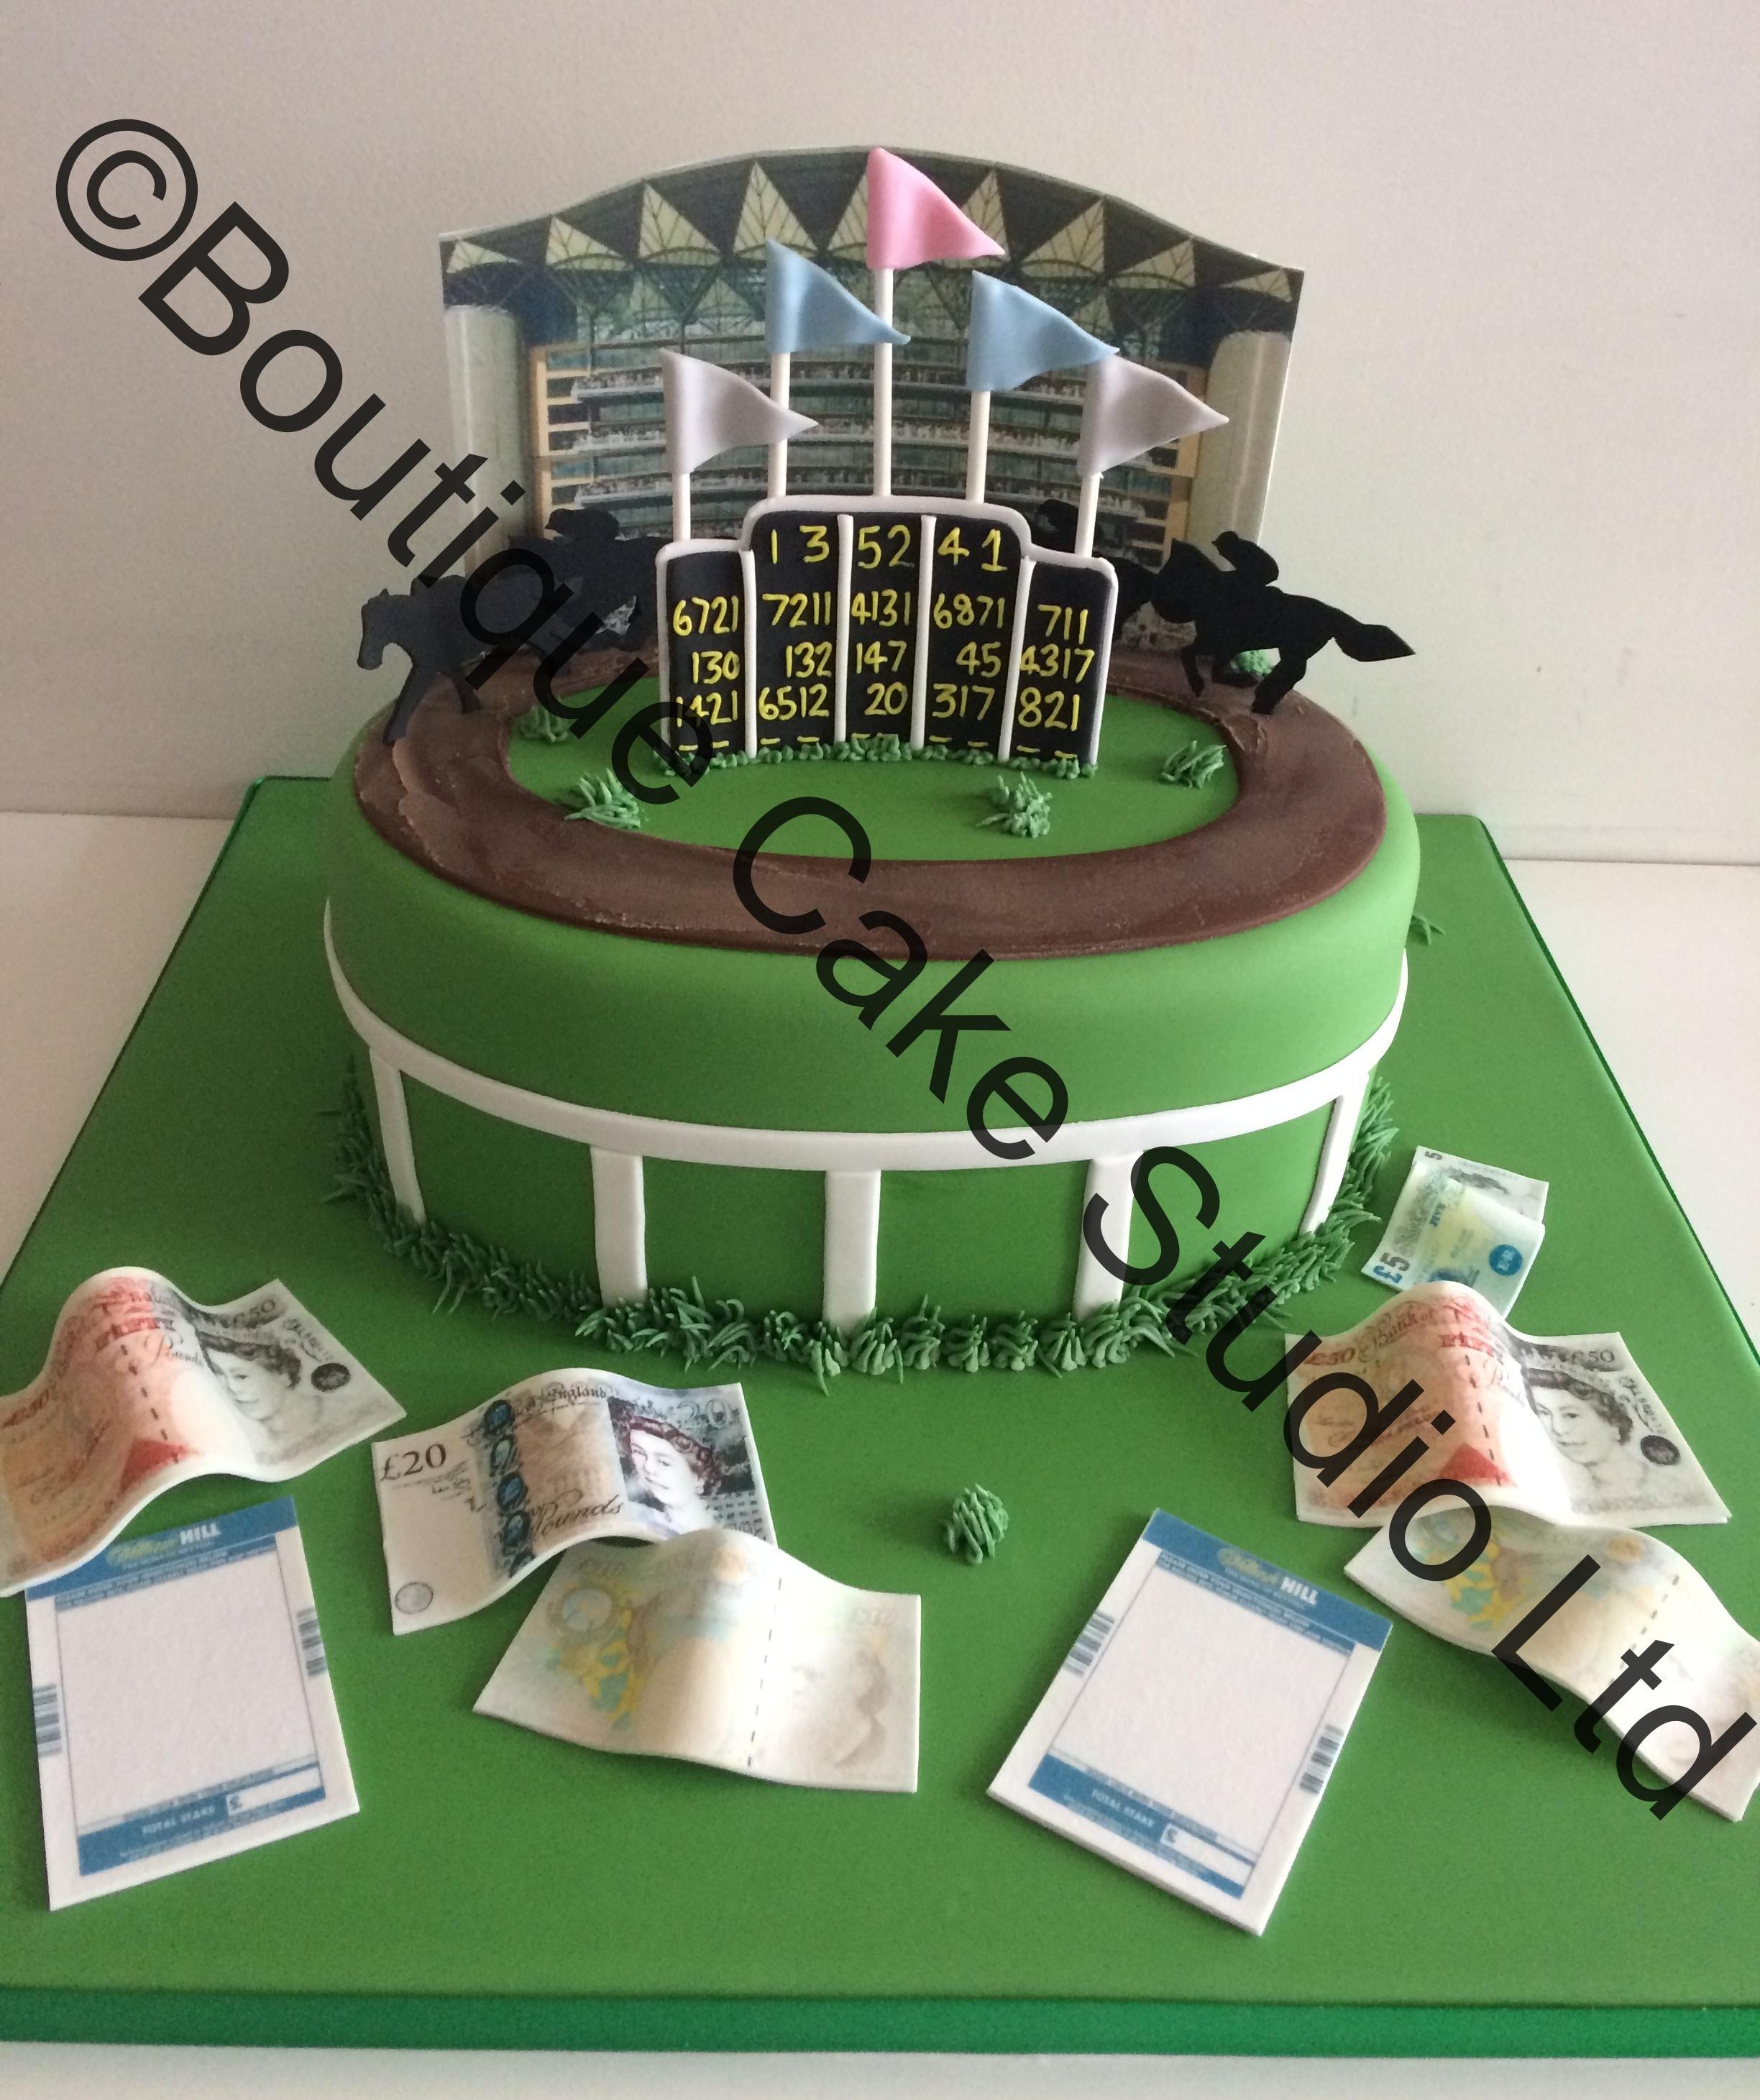 Betting themed Horse Racing Cake